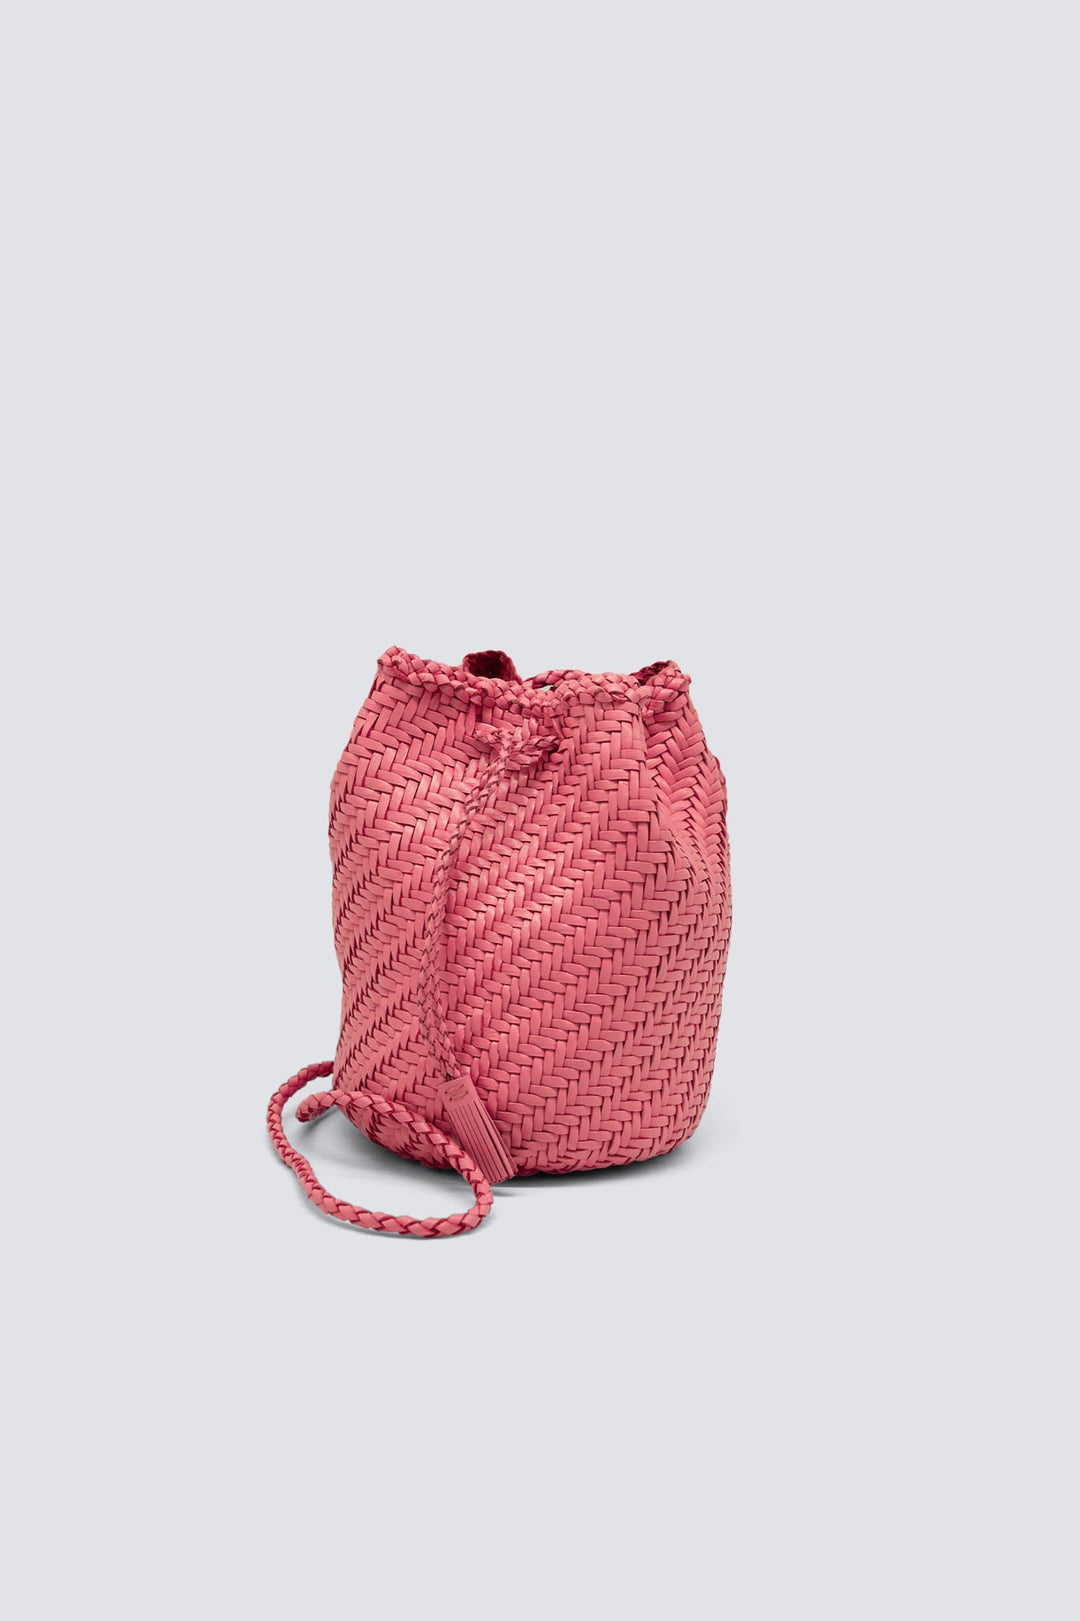 Dragon Diffusion woven leather bag handmade - Pompom Double Jump Strawberry